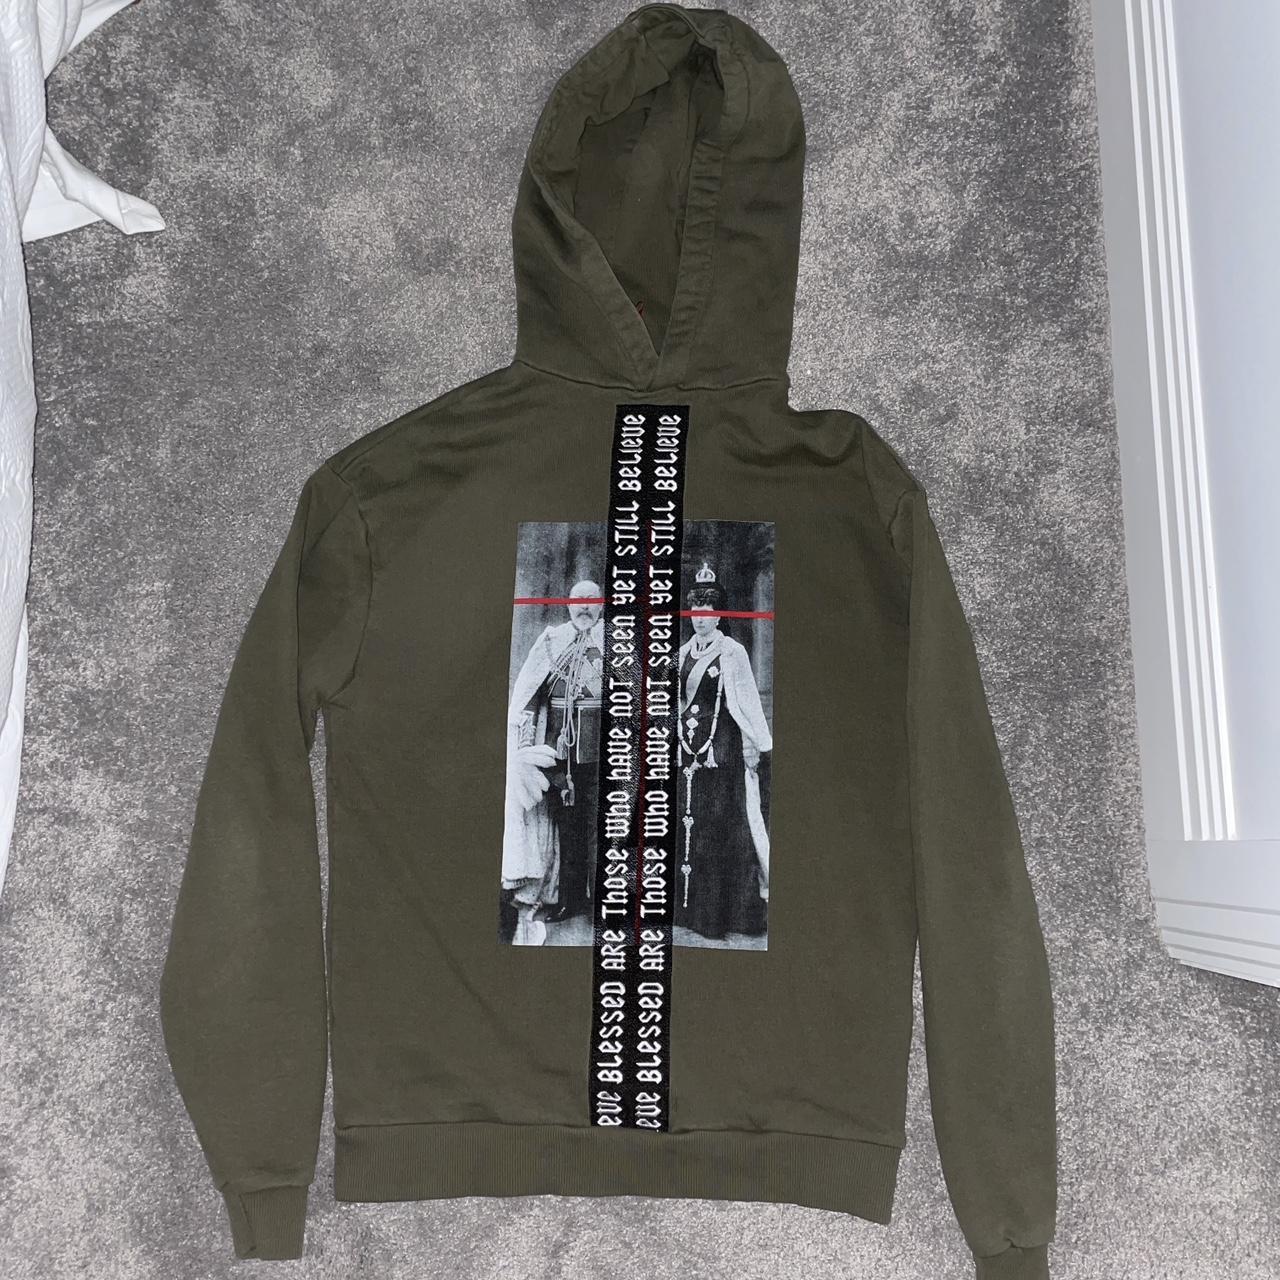 ‘Only the blind’ hoodie - Size Small - Depop